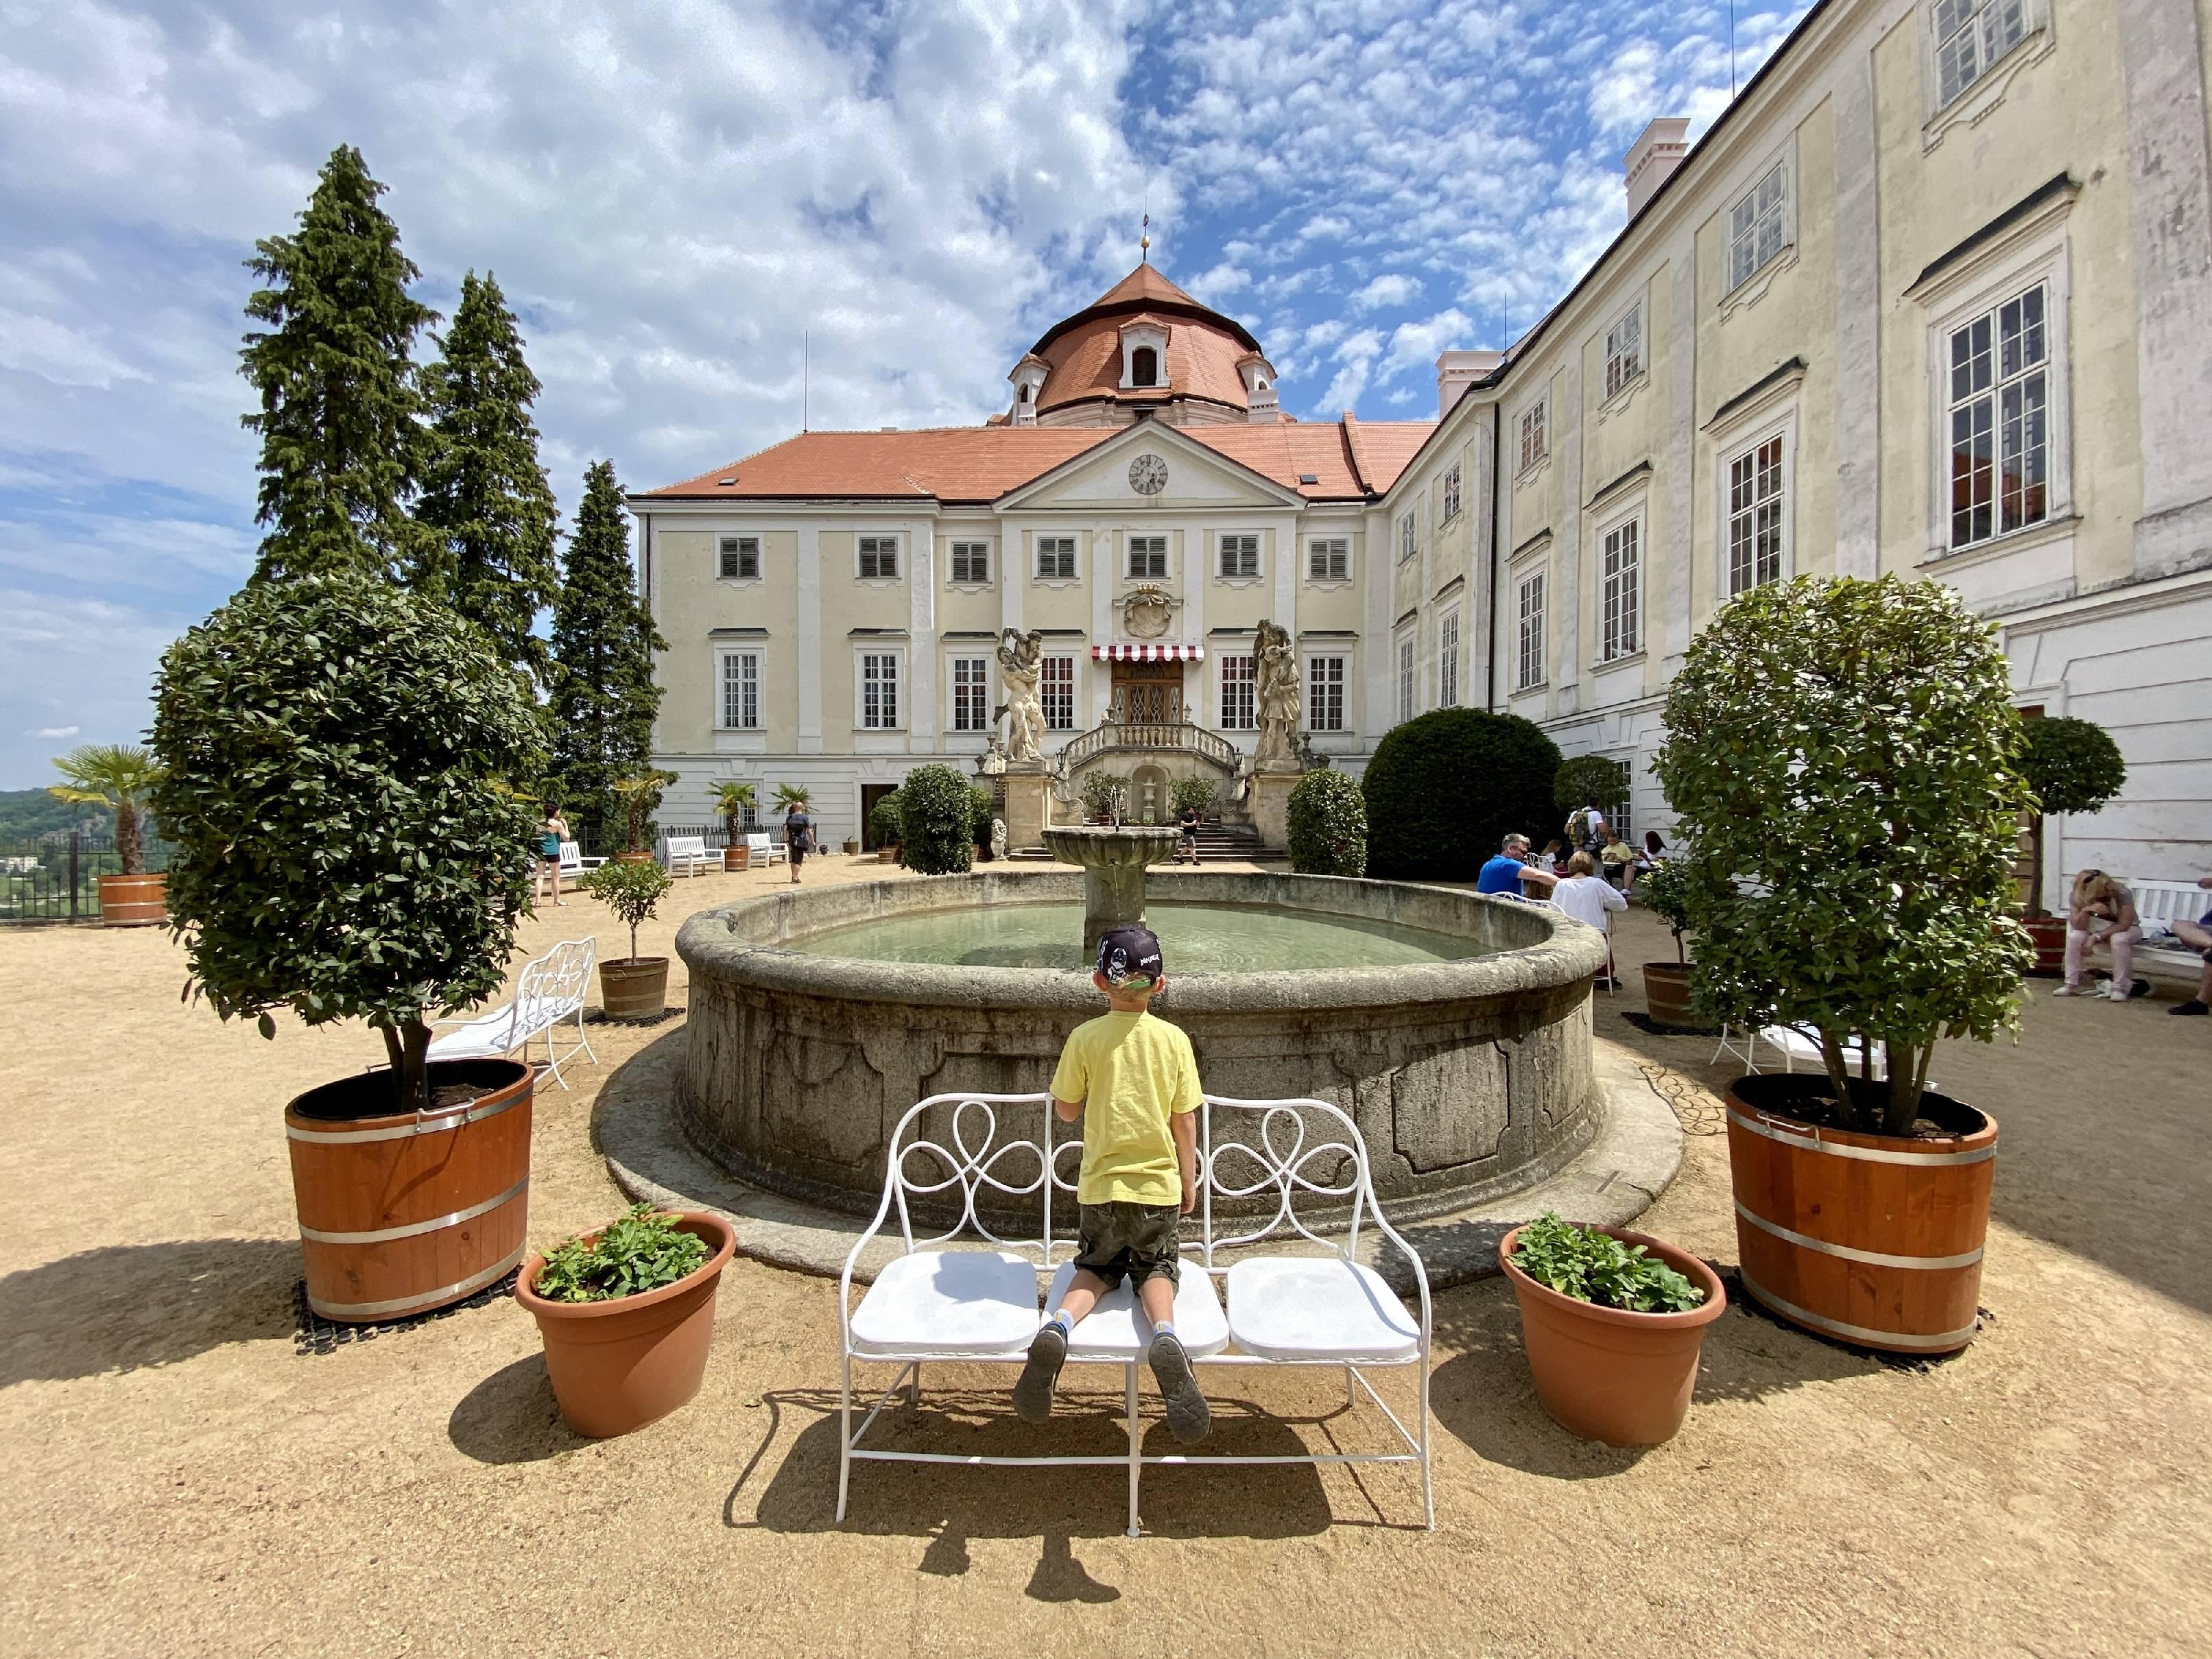 The best attractions in South Moravia – image 3